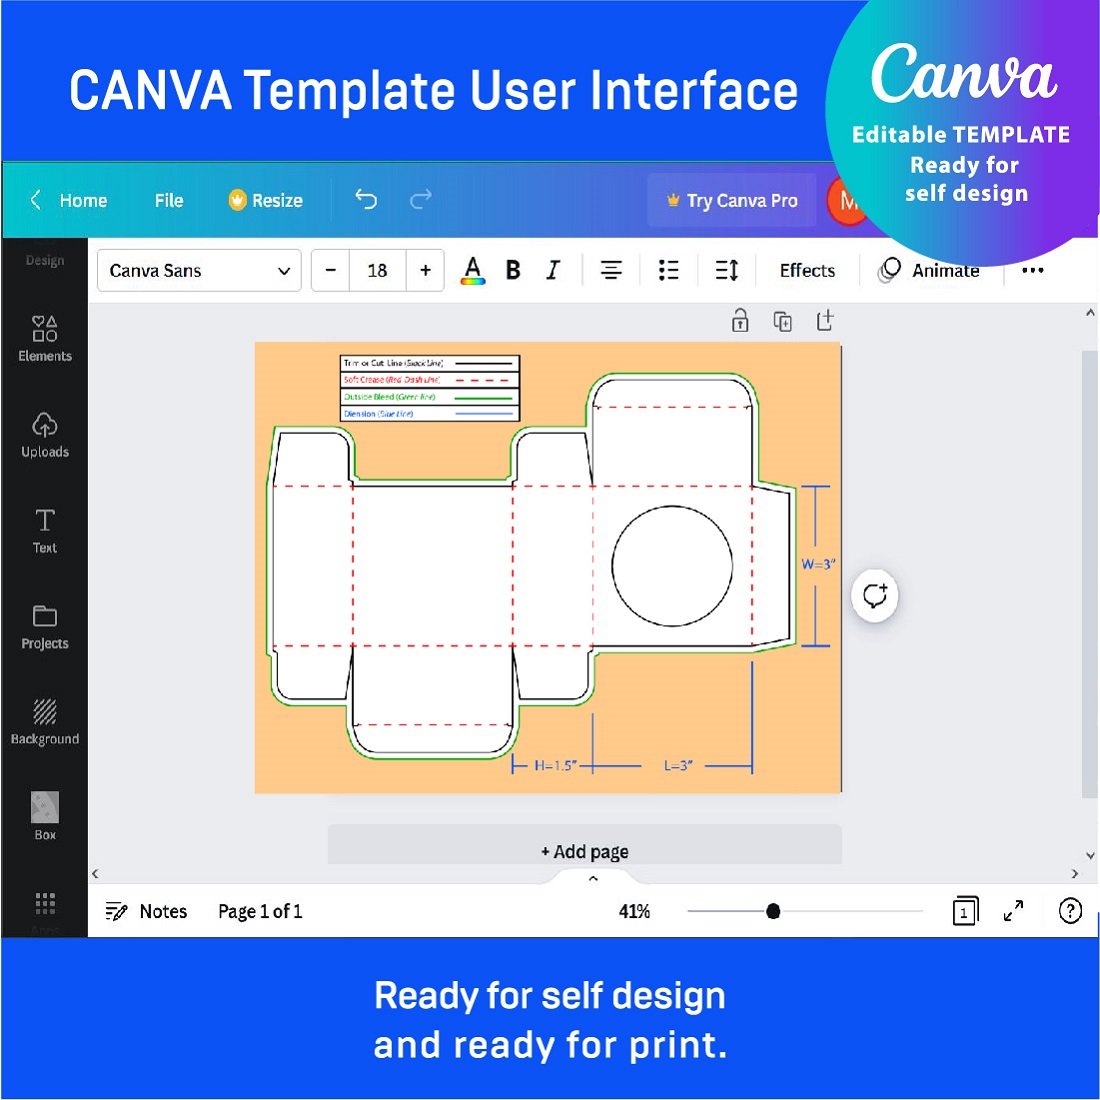 Screen shot of the canva template user interface.